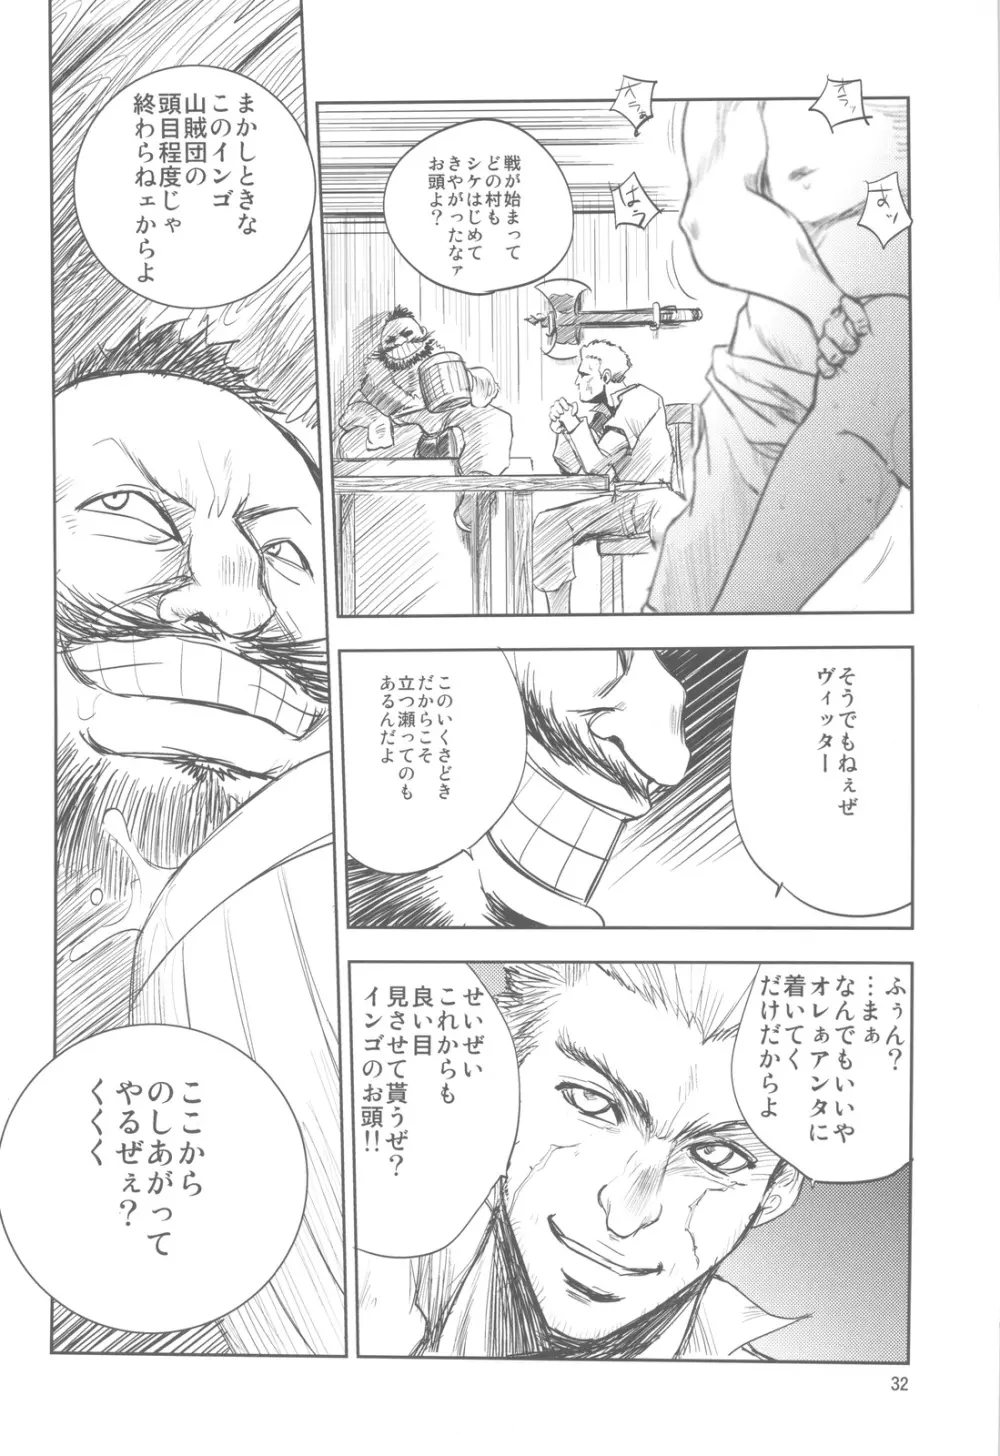 GRASSEN'S WAR ANOTHER STORY Ex #01 ノード侵攻 I Page.31